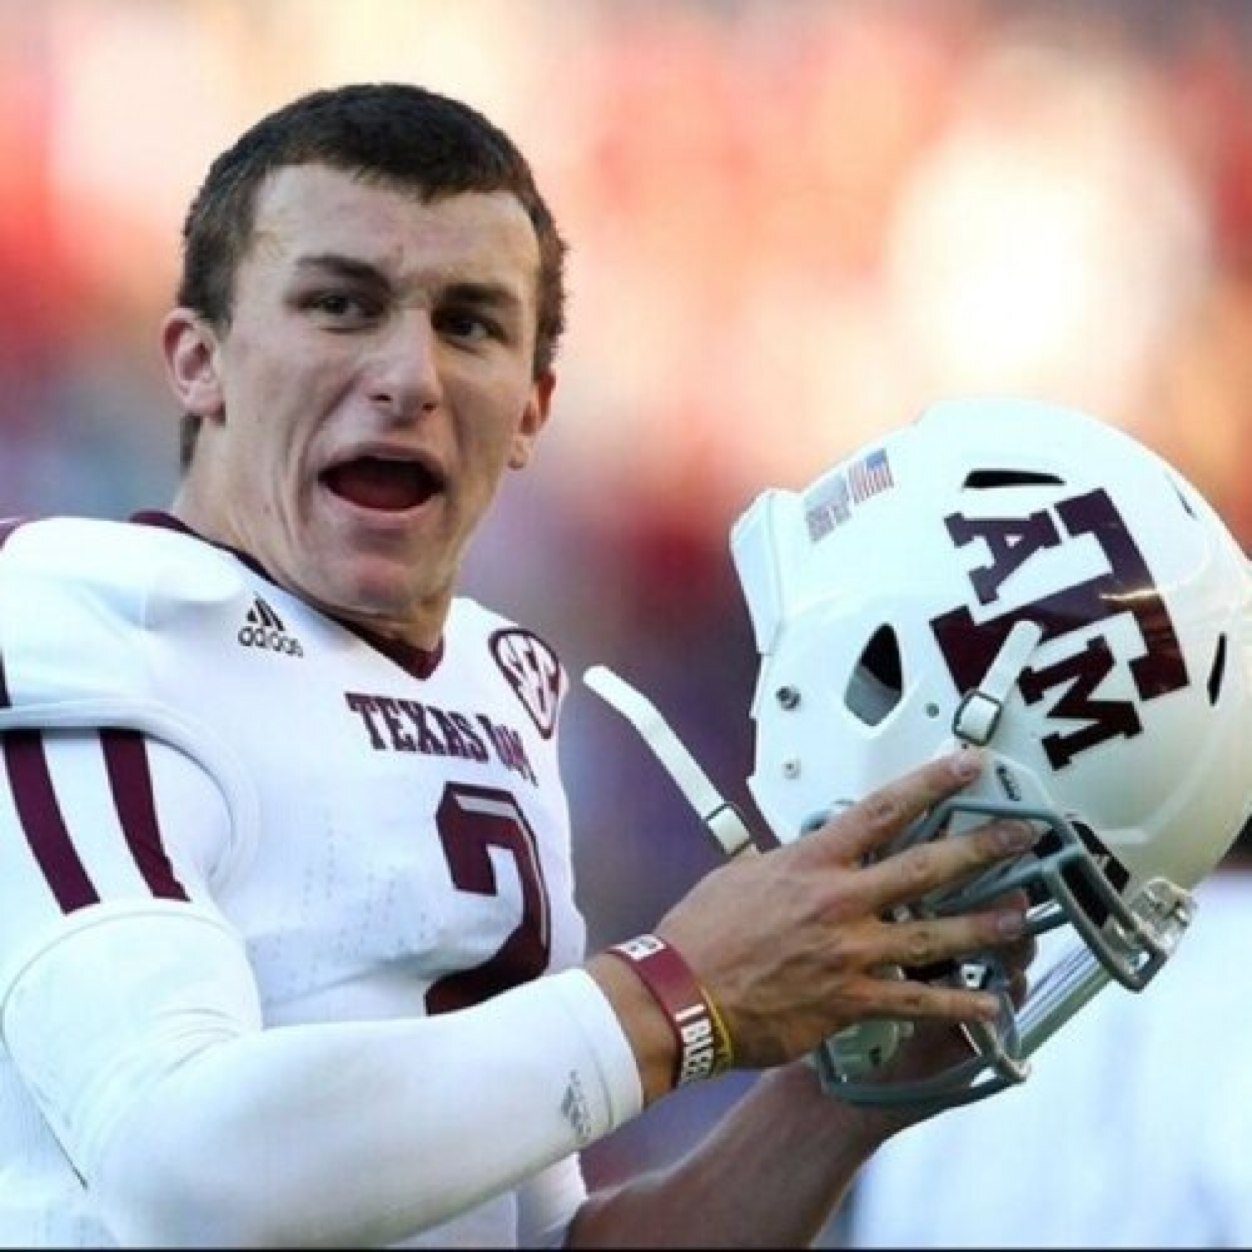 Has Johnny Manziel been drafted yet?